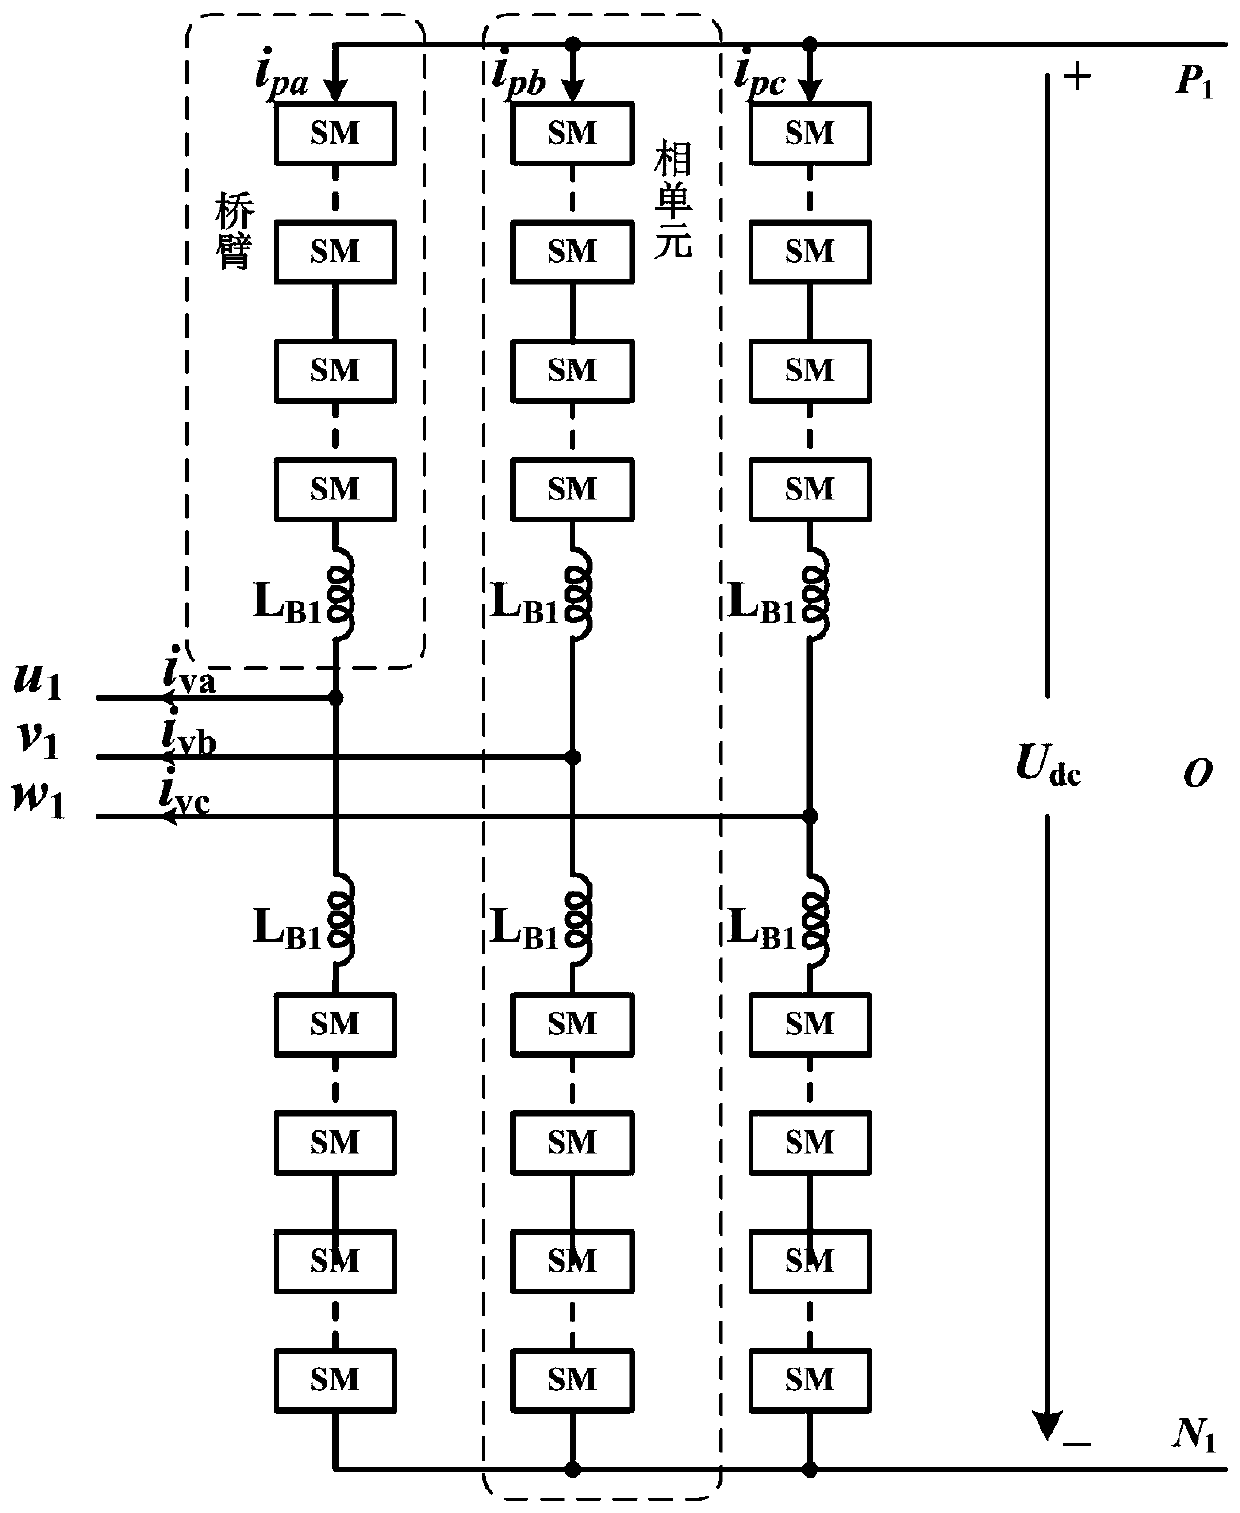 A thermal shock suppression control method for mmc single-phase AC ground fault based on active bypass